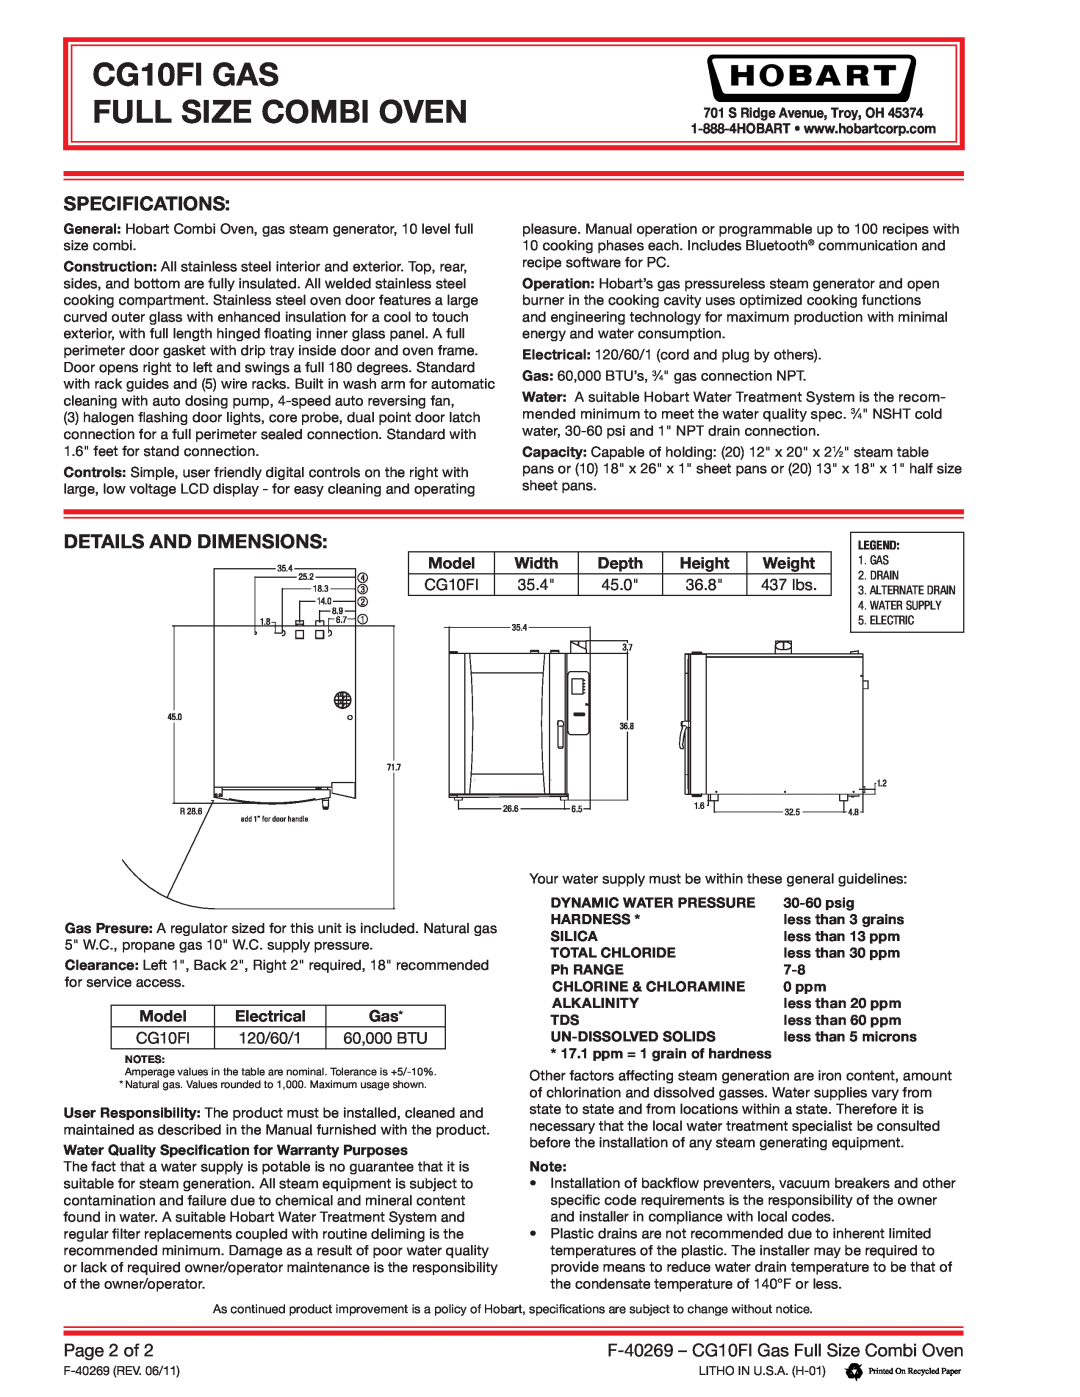 Hobart Specifications, Details And Dimensions, Page 2 of, CG10FI GAS FULL SIZE COMBI OVEN, Model, Width, Depth, Height 